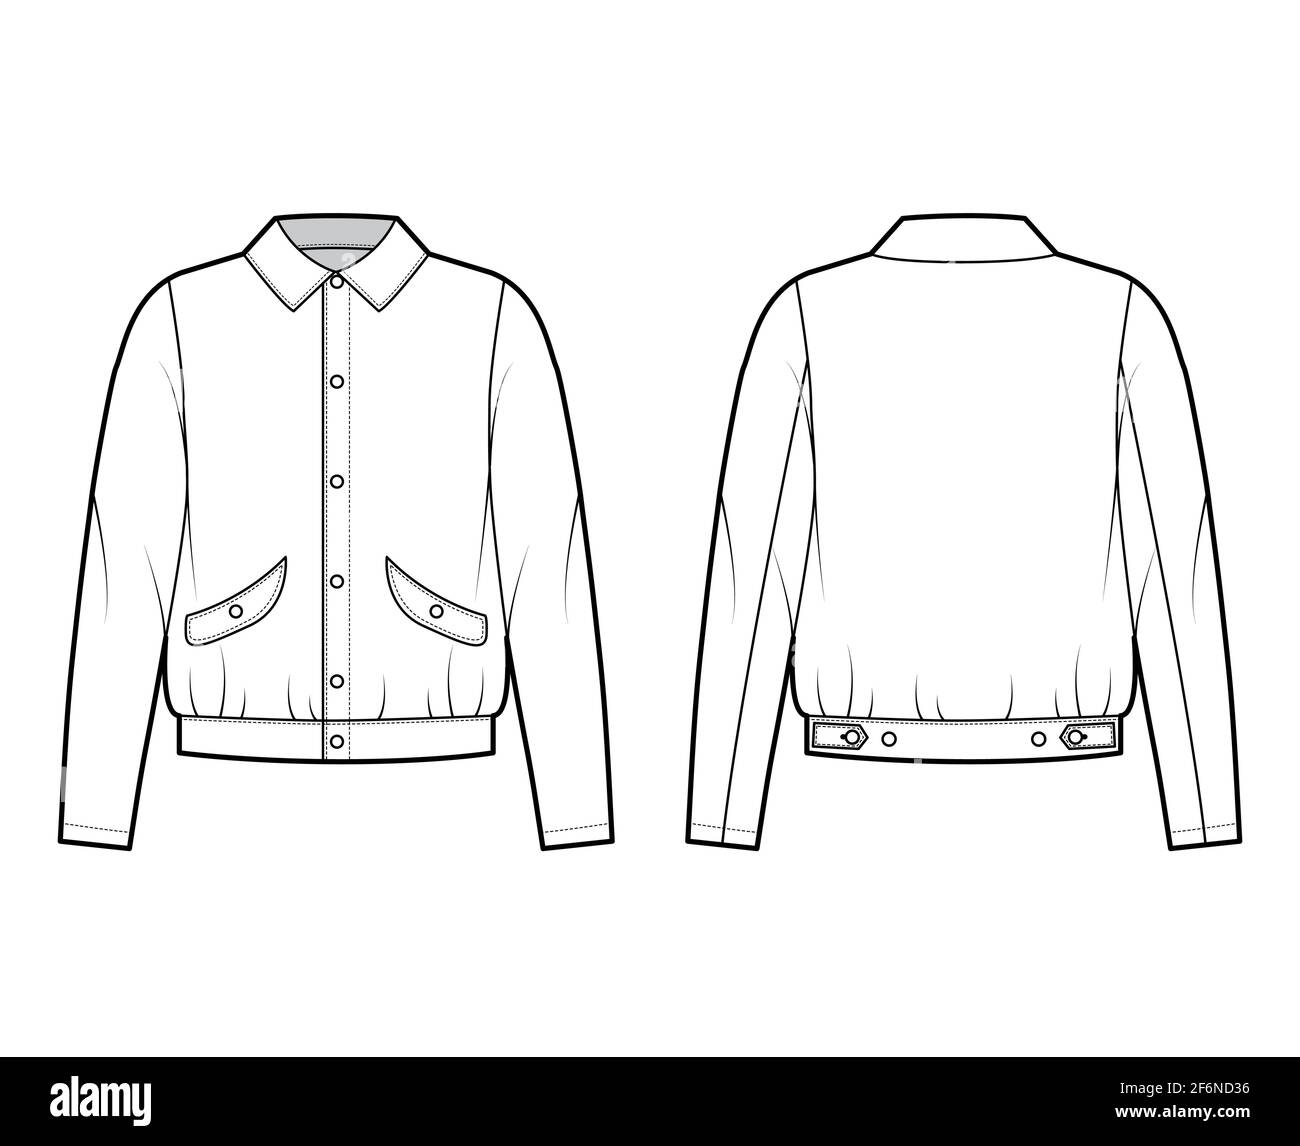 Blouson jacket technical fashion illustration with classic collar, oversized, long sleeves, flap pockets, snap fastening. Flat coat template front, back white color. Women men unisex top CAD mockup Stock Vector